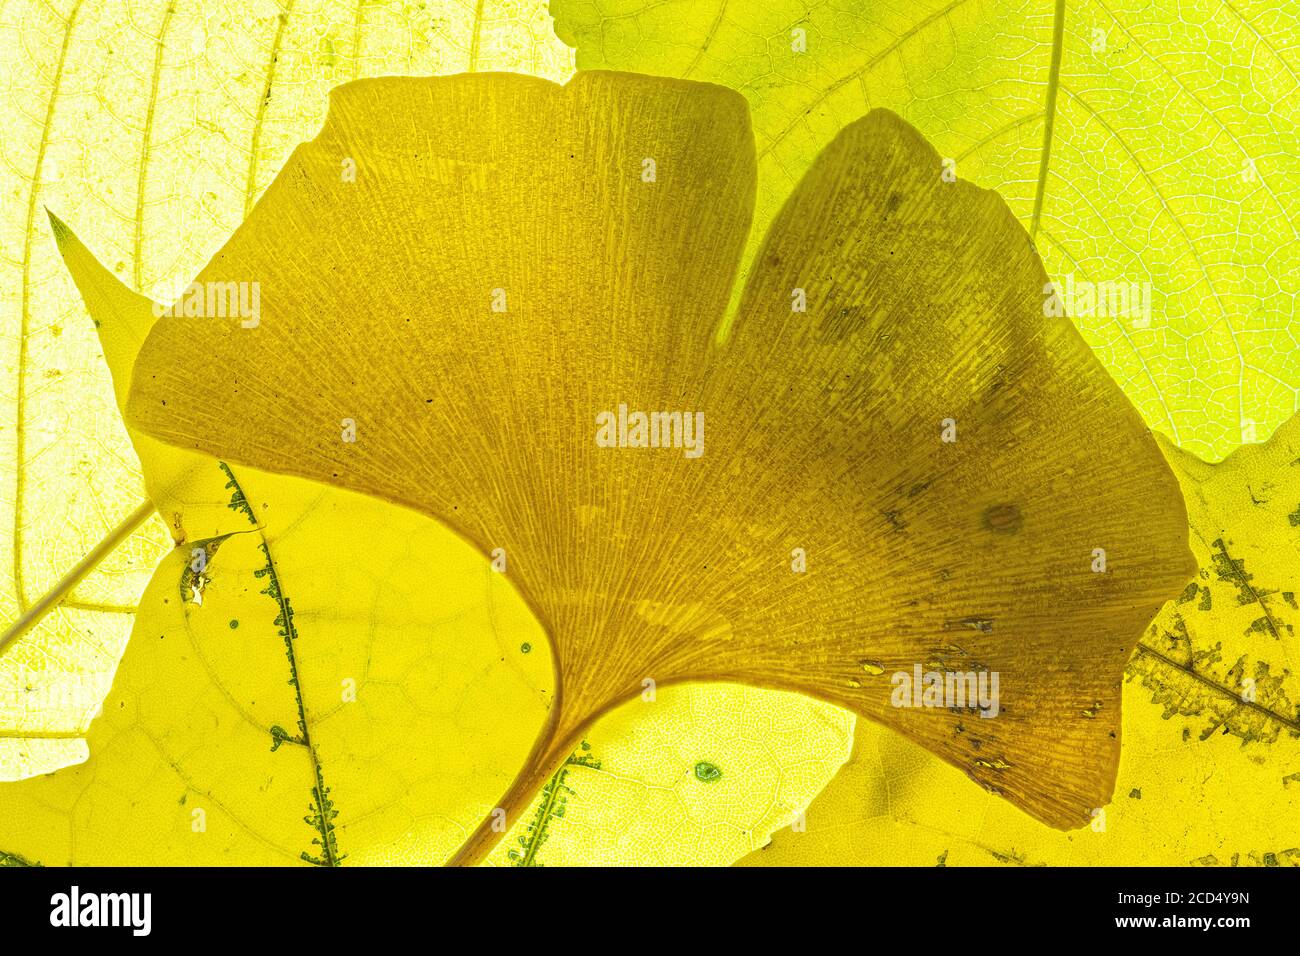 Autumn Ginkgo Leaf on Cherry and Maple Tree Leaves Stock Photo